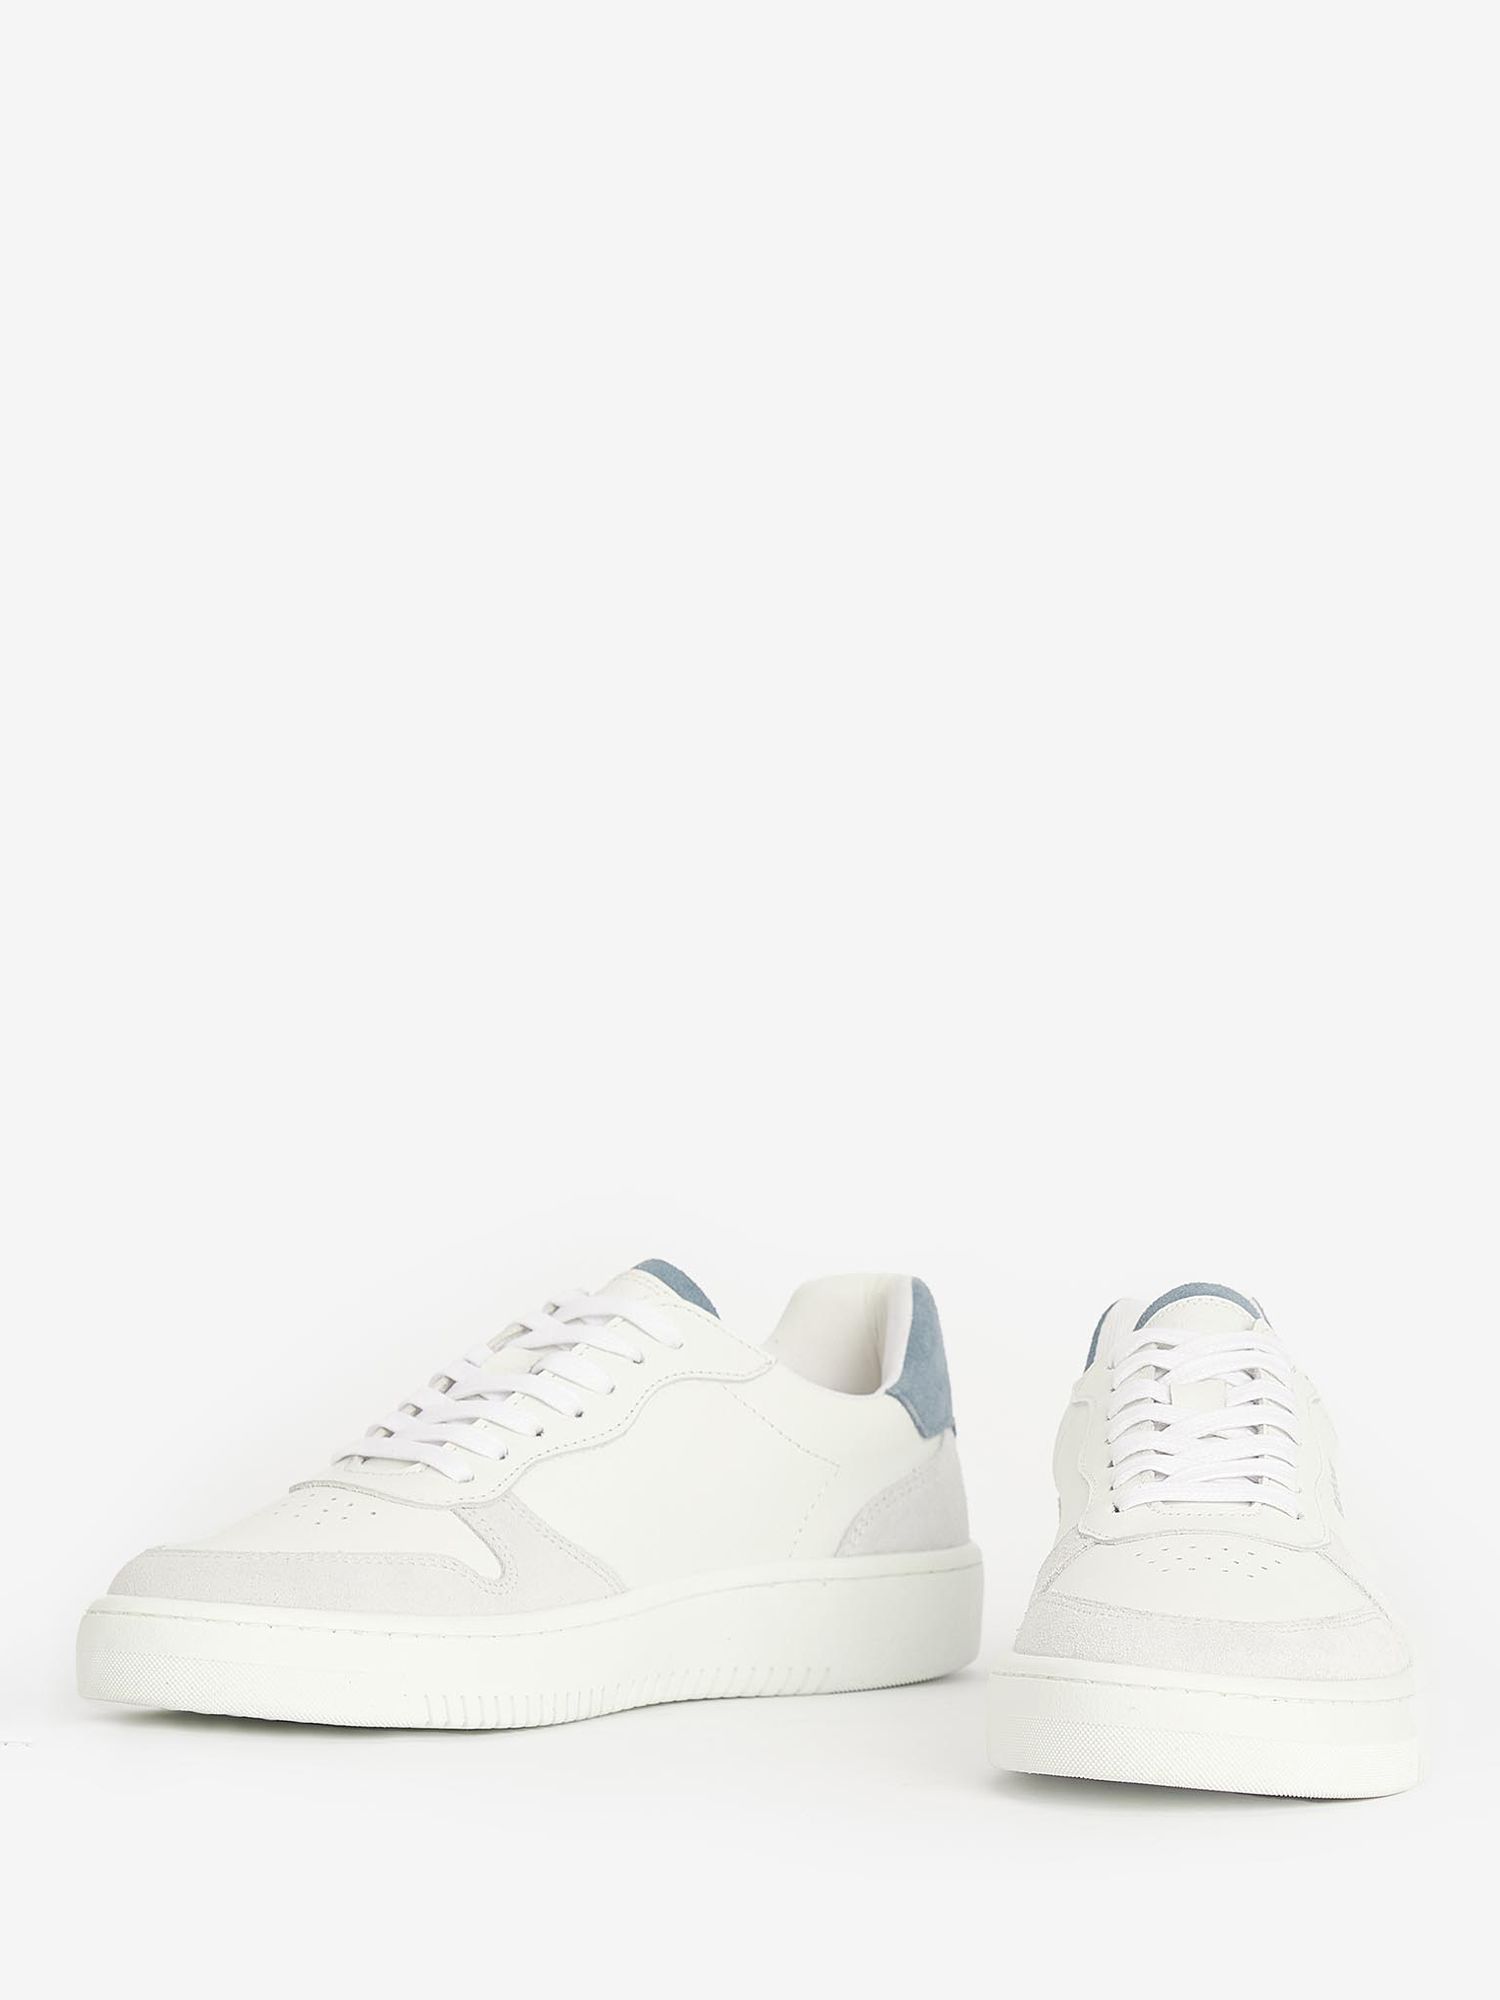 Buy Barbour Celeste Leather and Suede Trainers Online at johnlewis.com